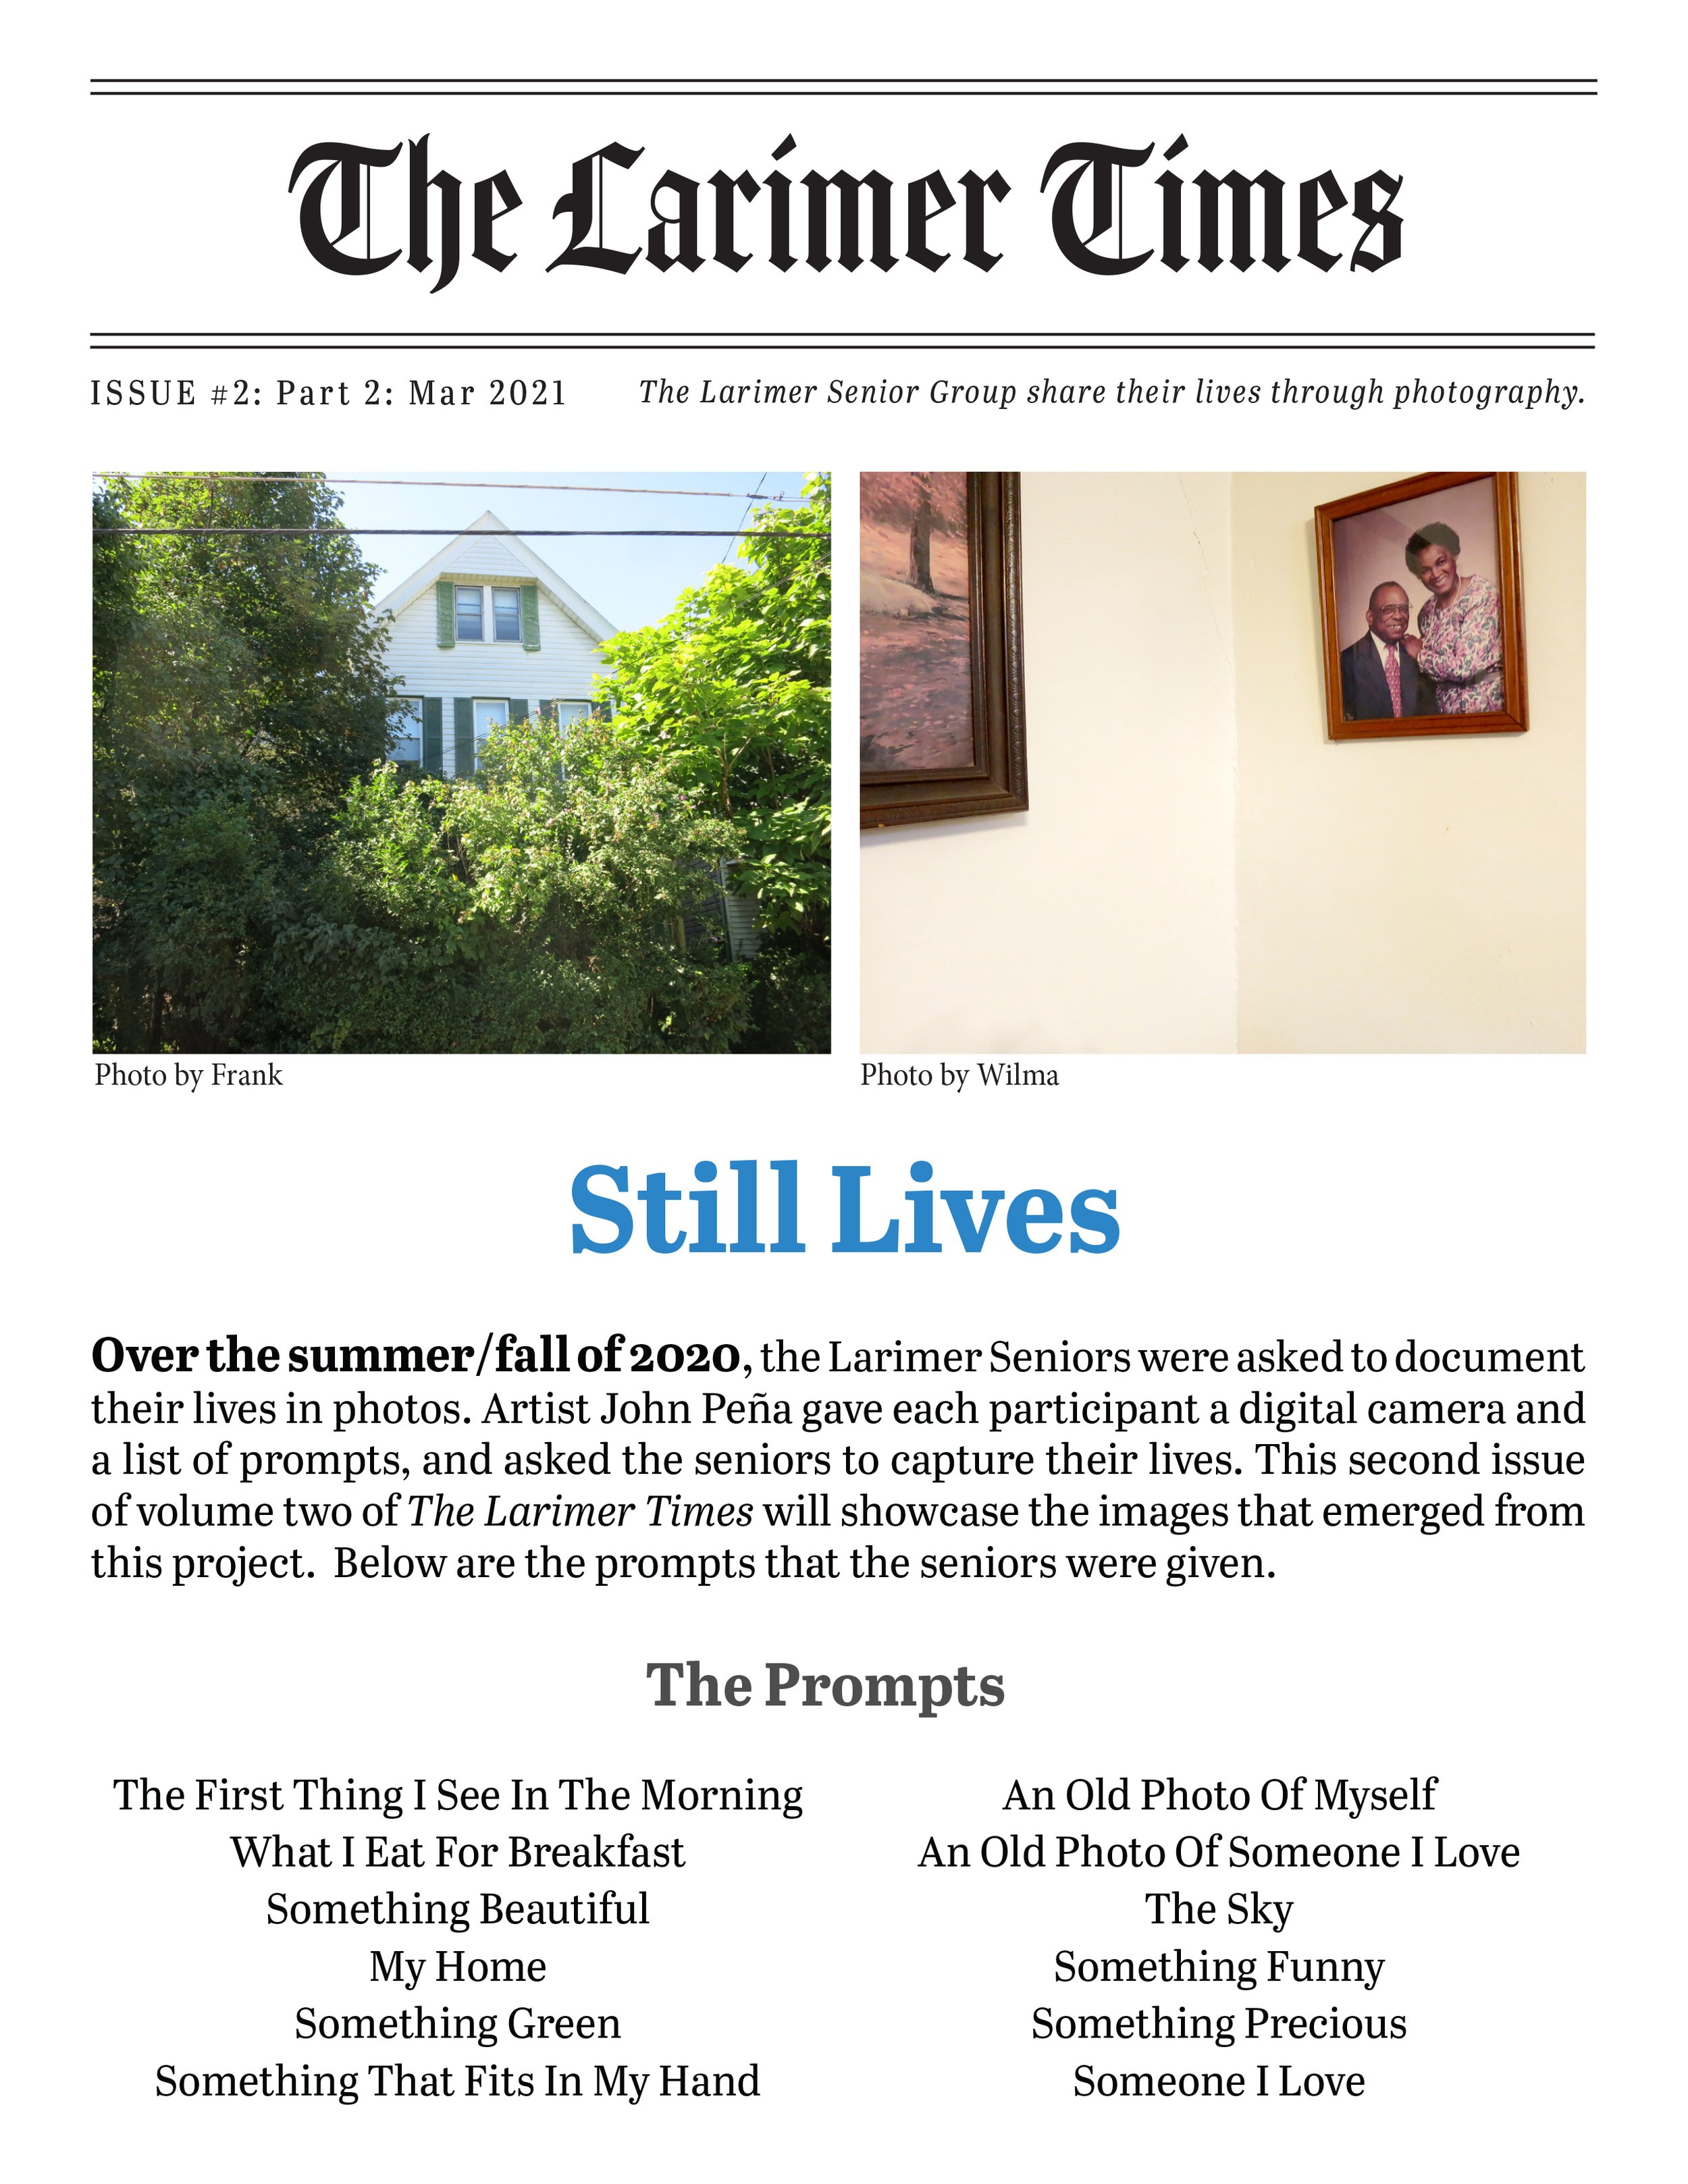 Larimer_Times_Issue_03_Cover.jpg